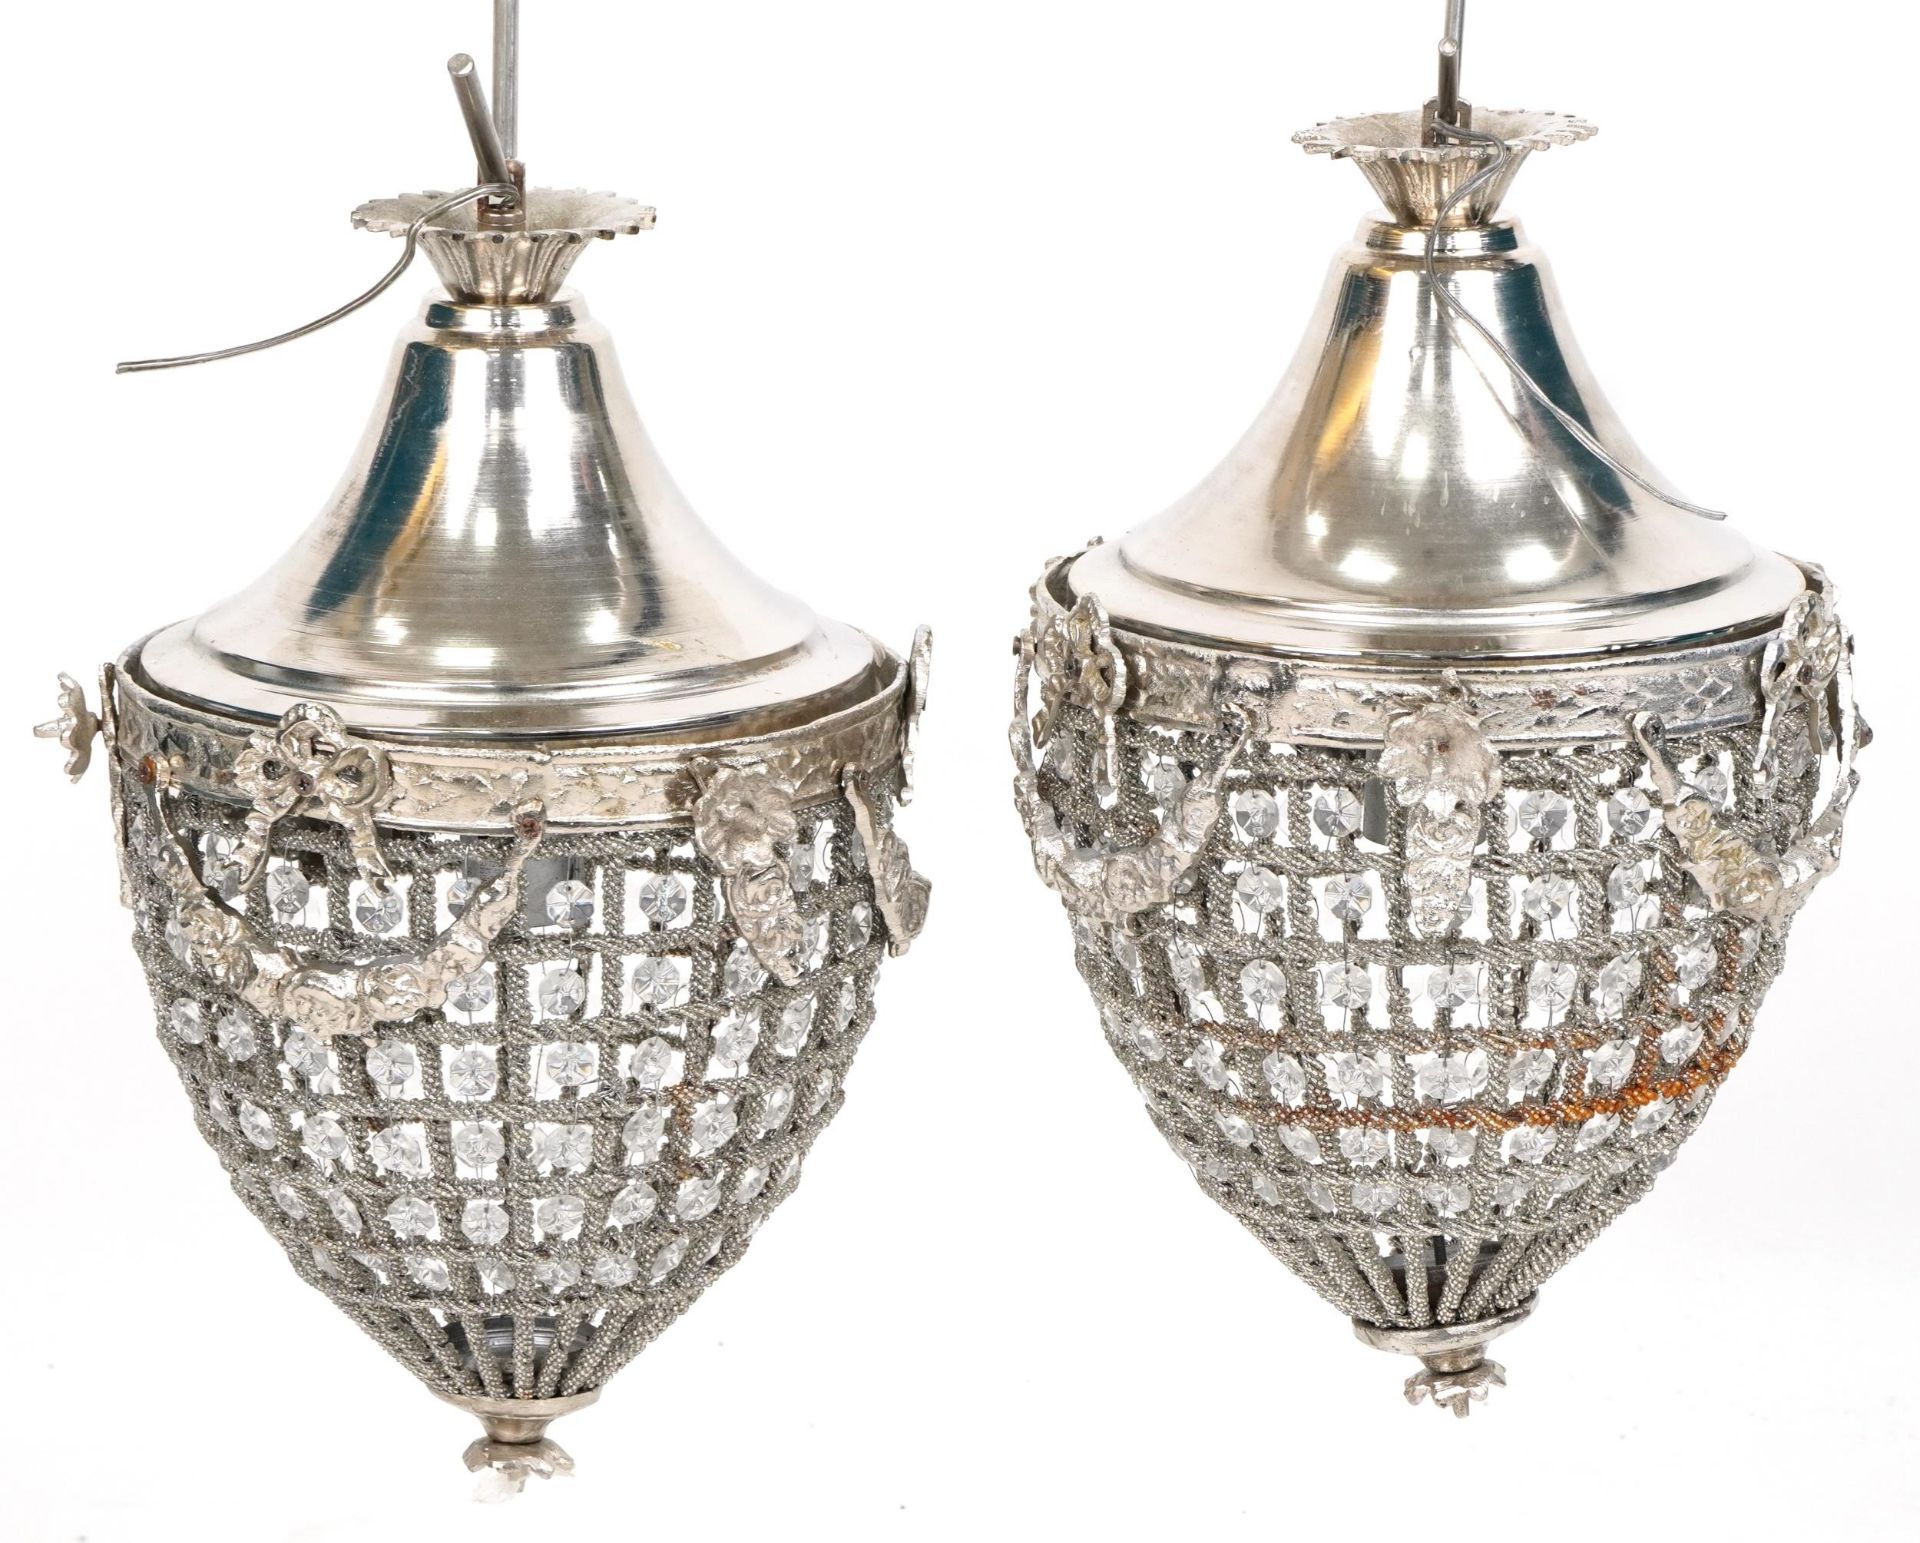 Pair of ornate silvered metal acorn chandeliers with swags and bows, 40cm high